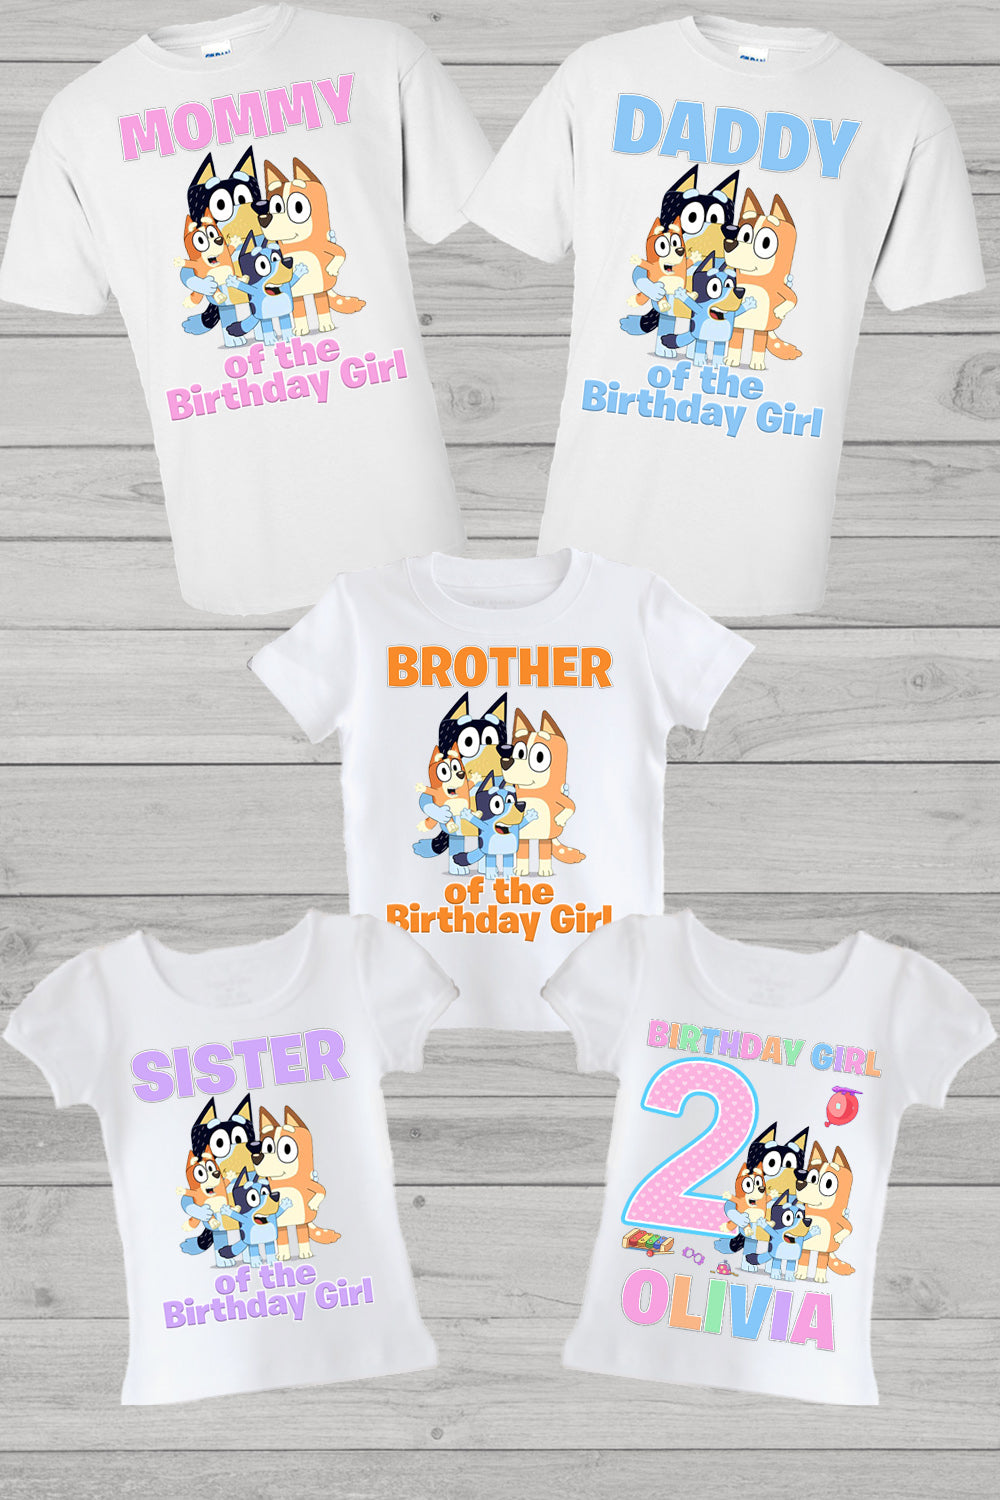 We had a Bluey 1st Birthday for our daughter this weekend. Made us matching  shirts. It was a hit with everyone. She totally loved it and her little  face got all existe